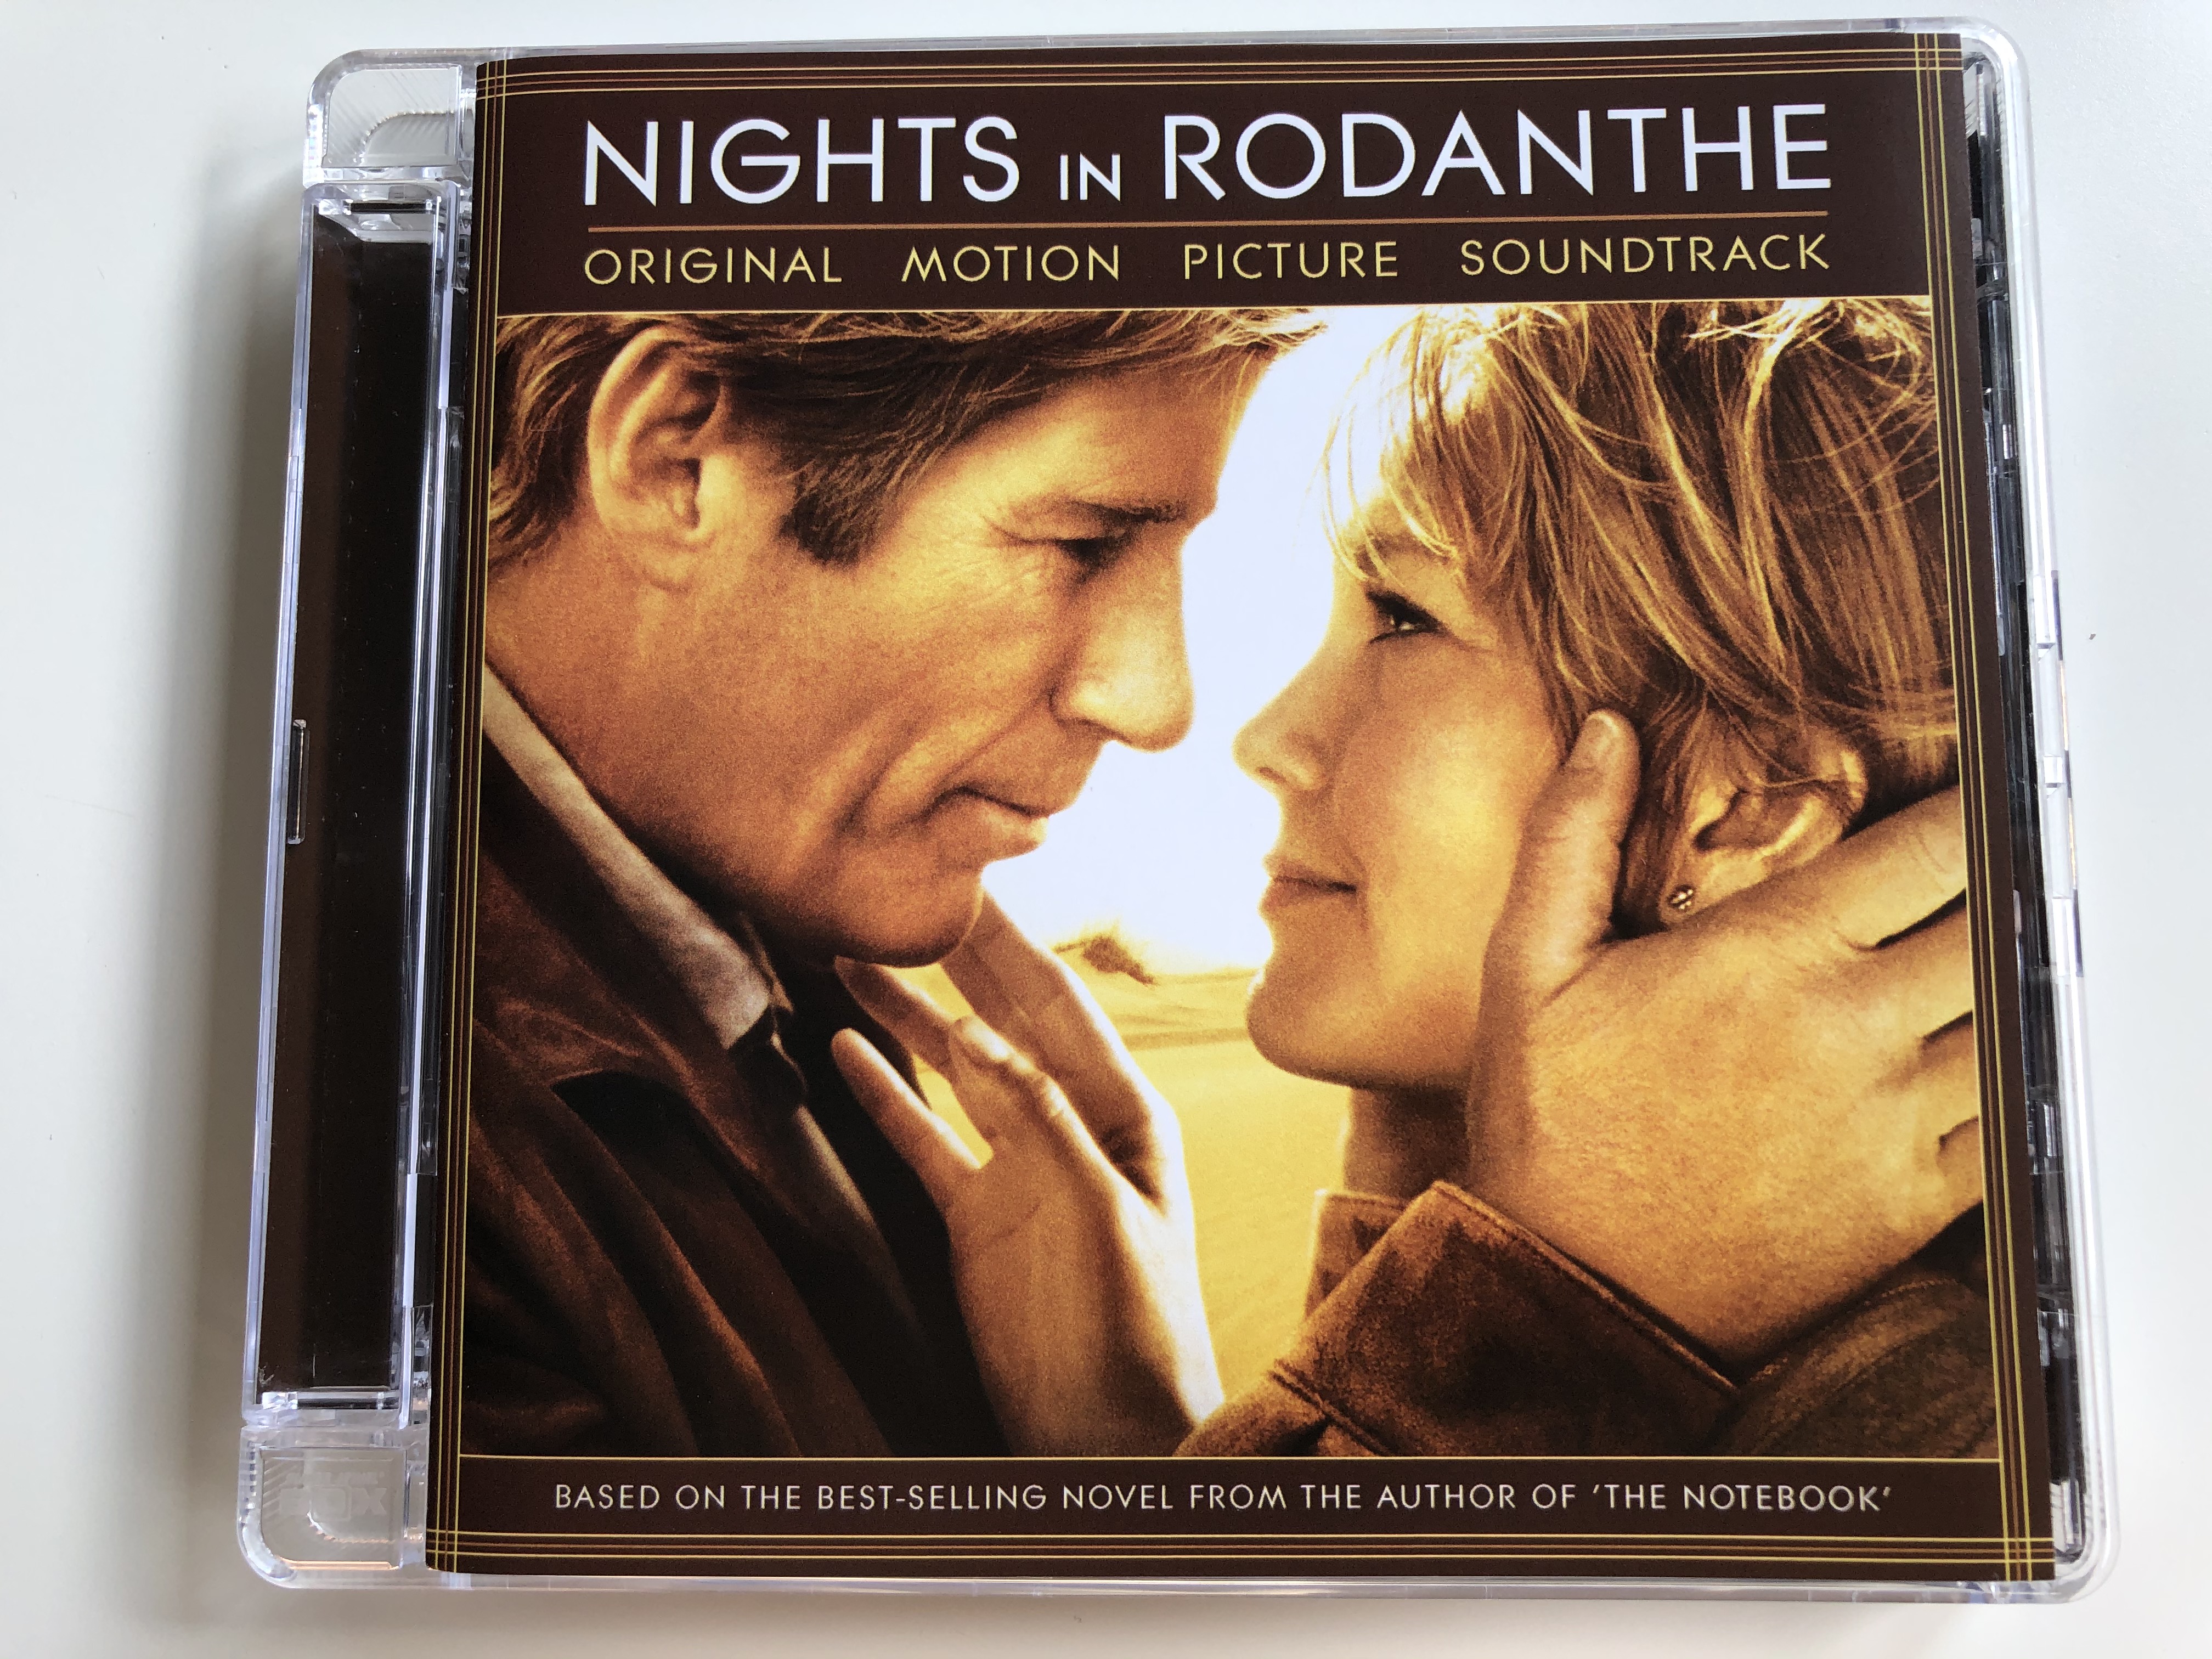 nights-in-rodanthe-original-motion-picture-soundtrack-based-on-the-best-selling-novel-from-the-author-of-the-notebook-decca-music-group-limited-audio-cd-2008-478-1383-1-.jpg